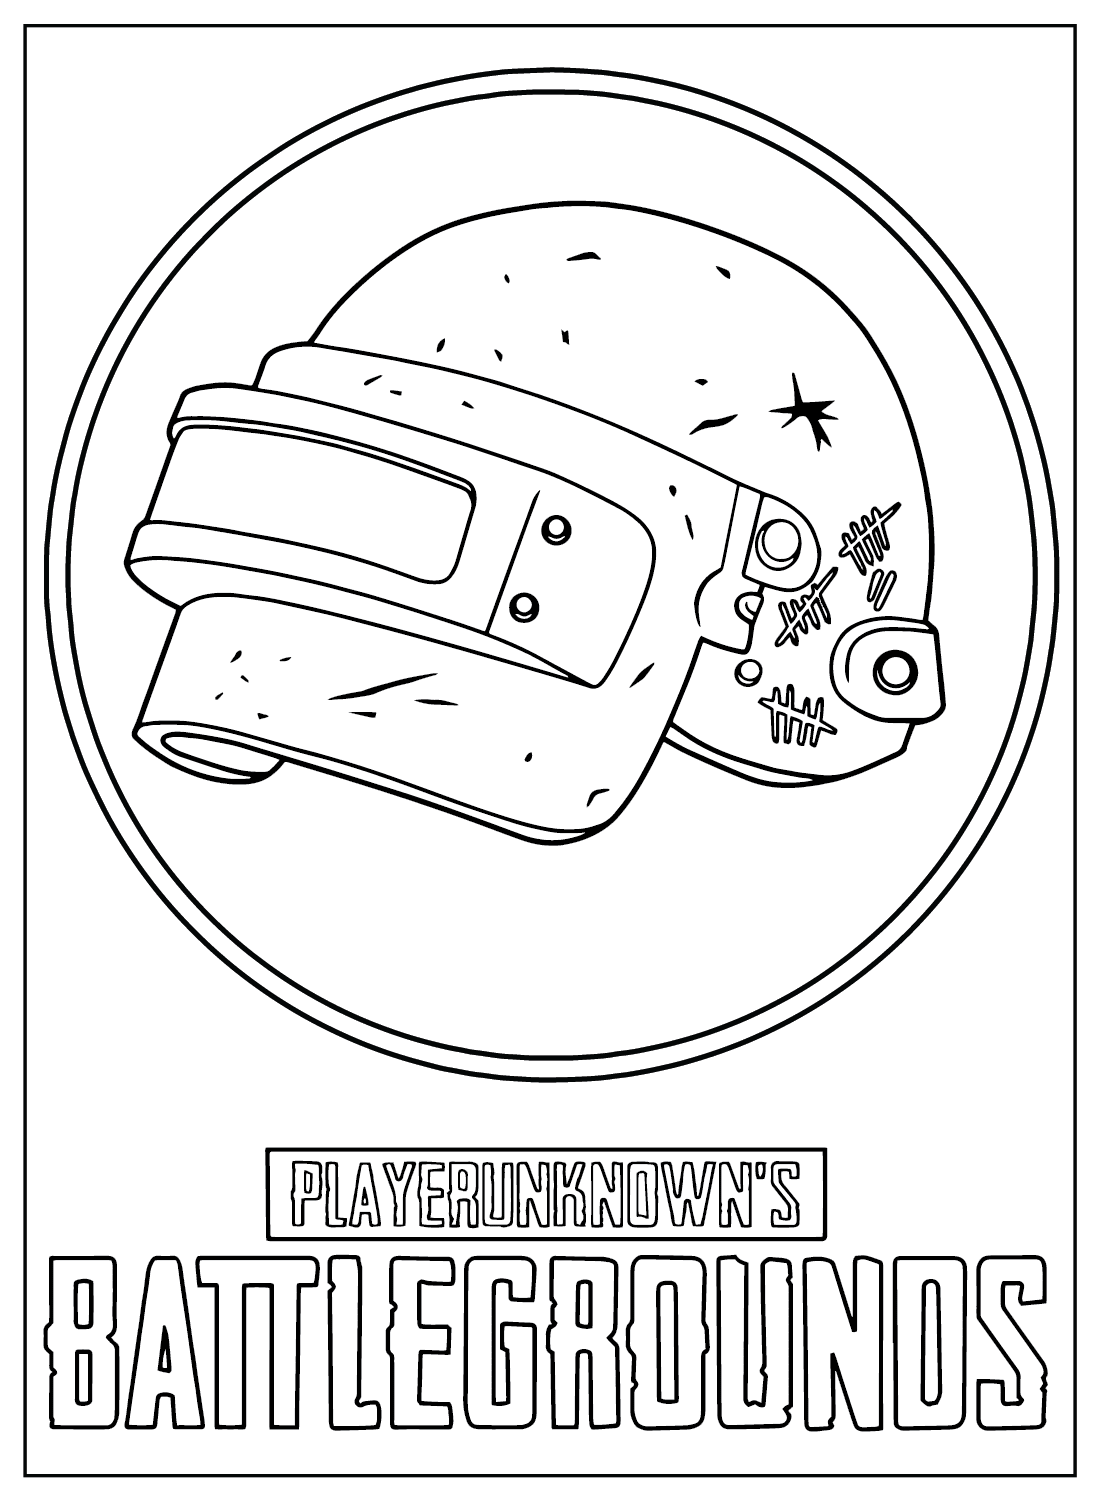 Pubg Battle Royale Game Coloring Page from PUBG